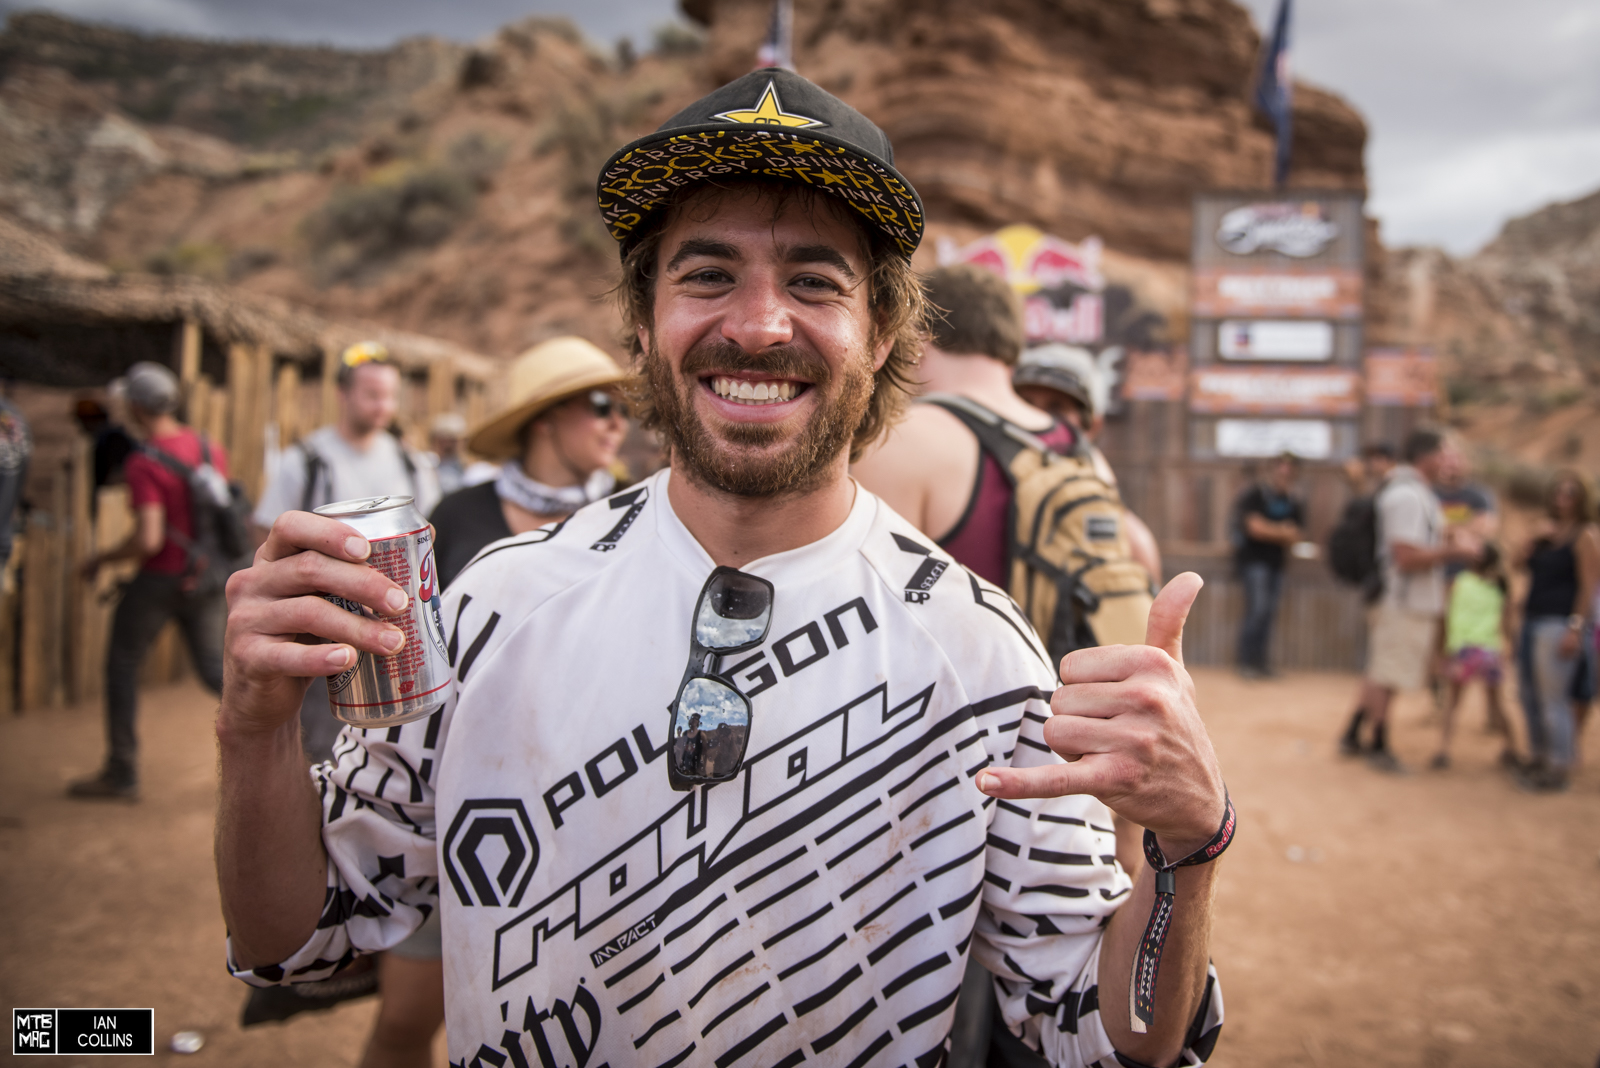 BEER and a big old smile. Kurt was so pumped on a second win. Congrats buddy!